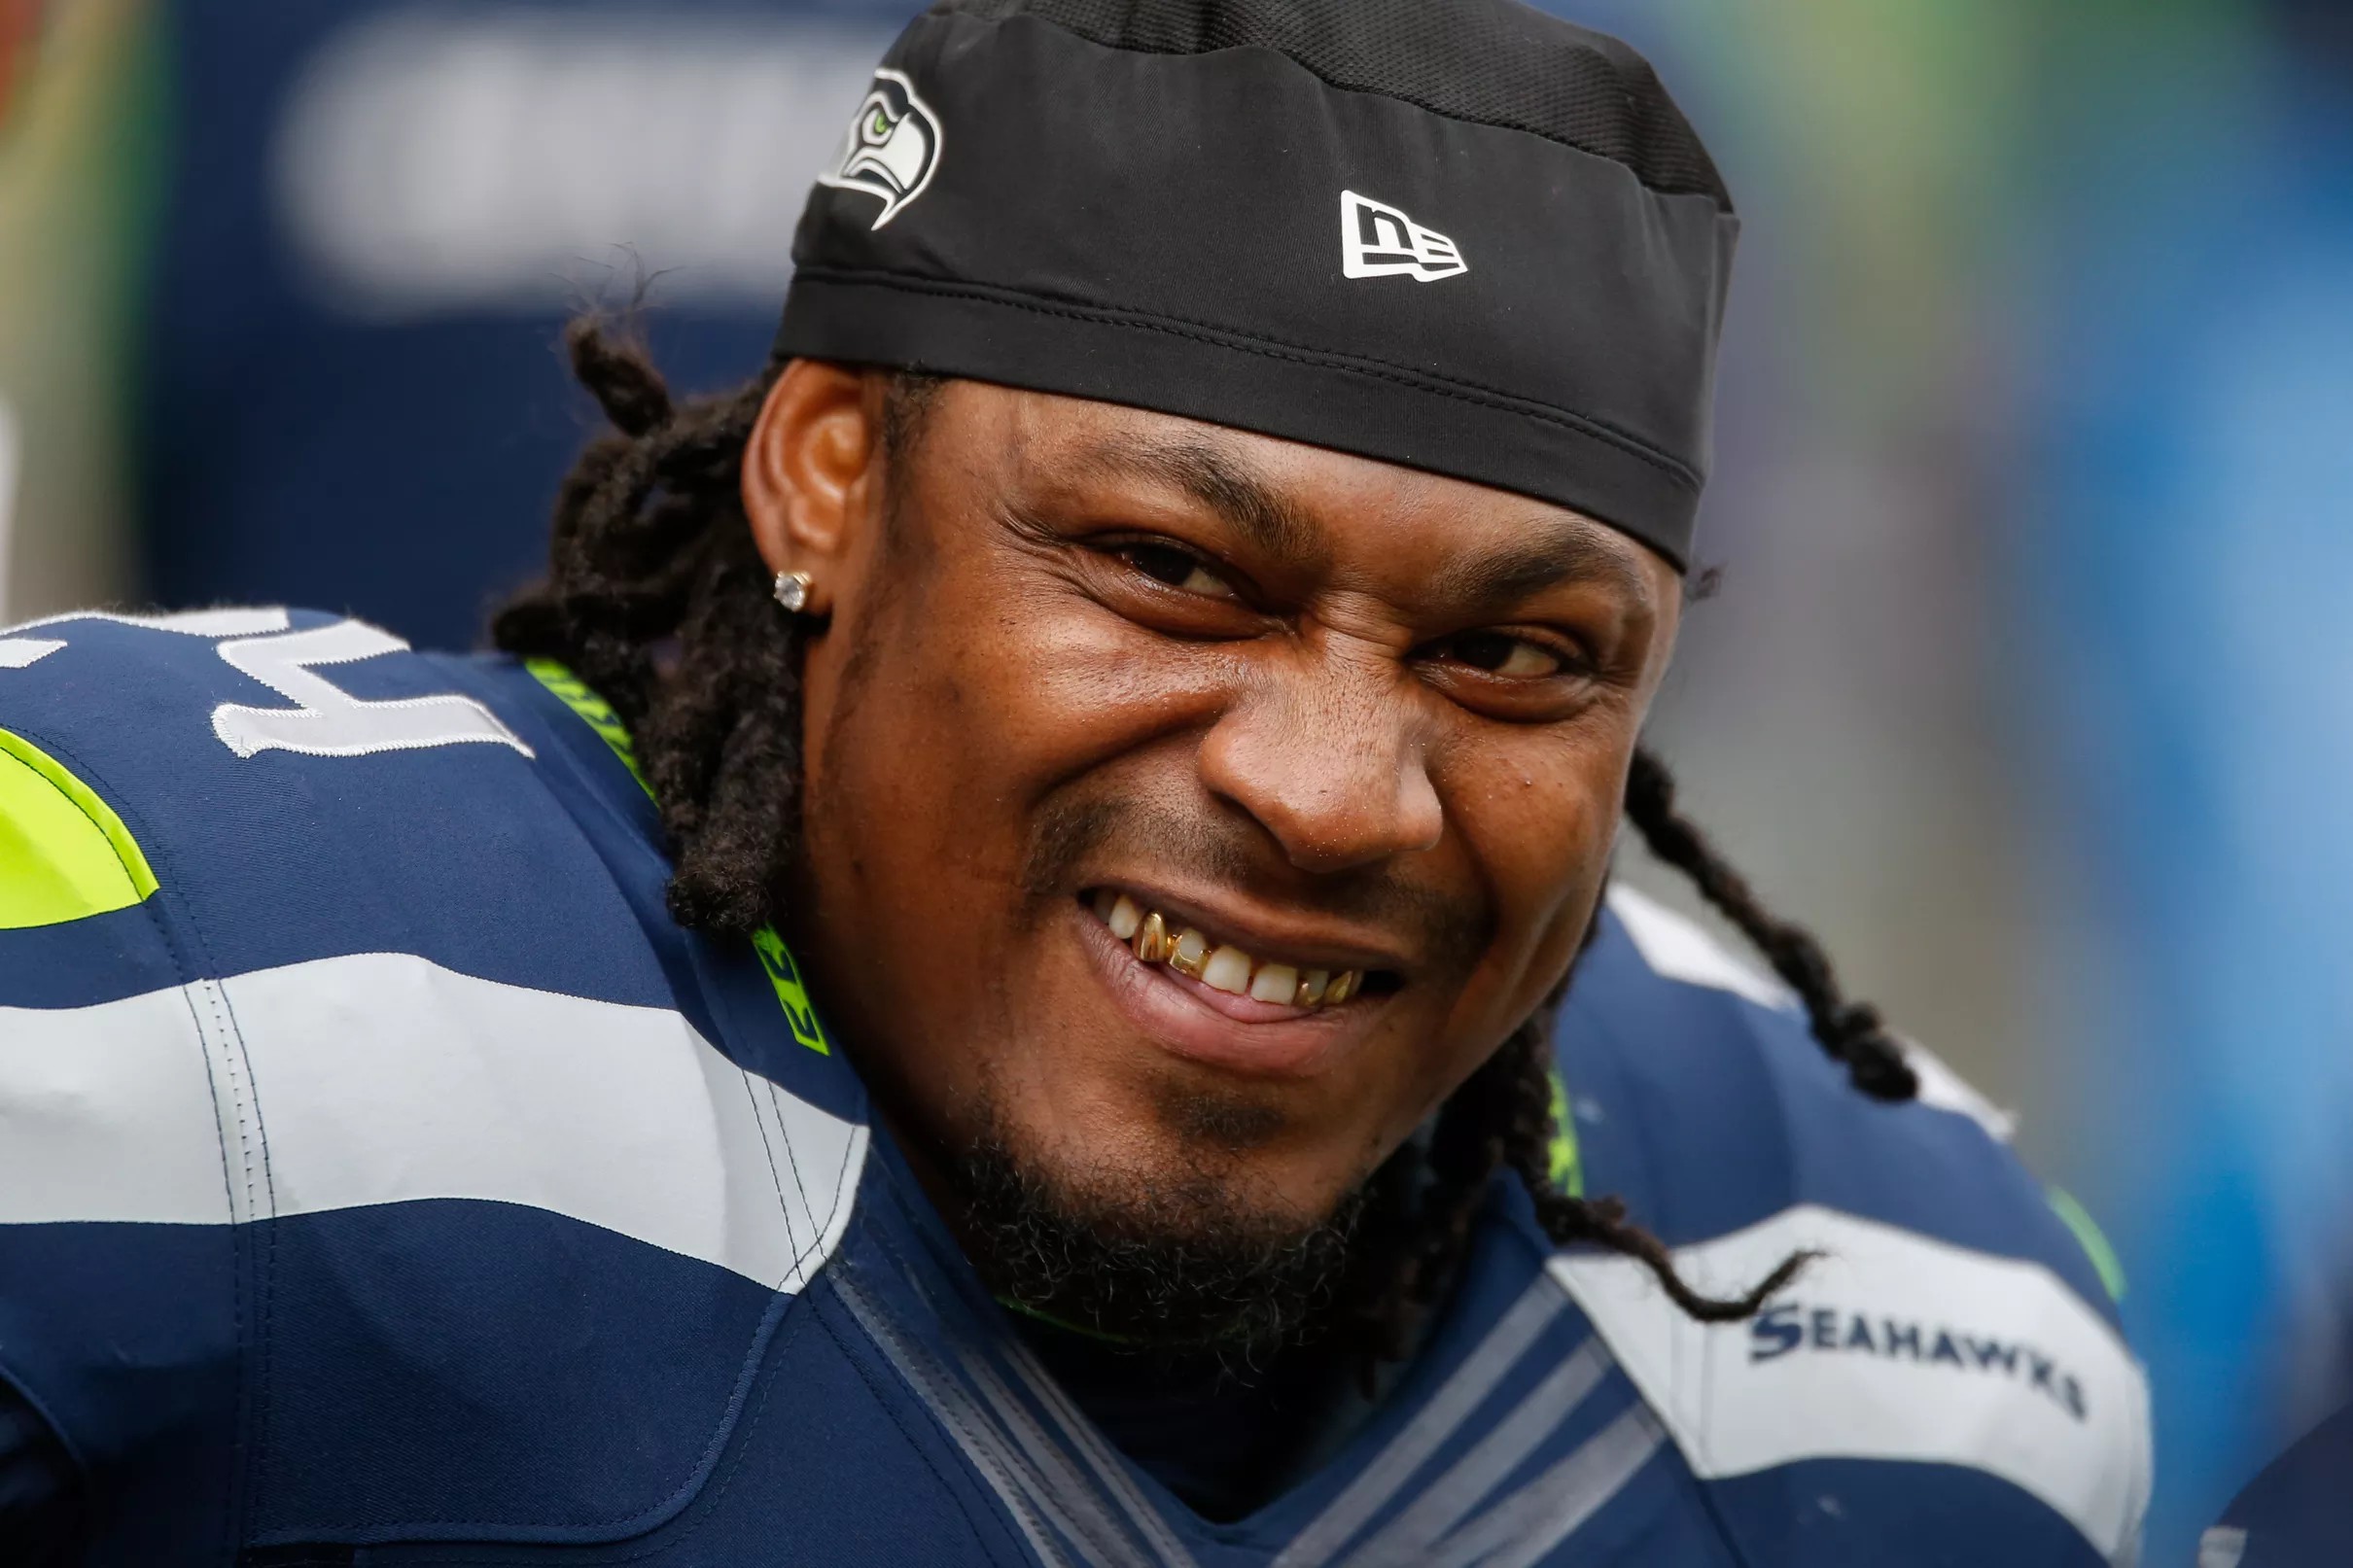 Marshawn Lynch is enjoying himself during his second stint with the